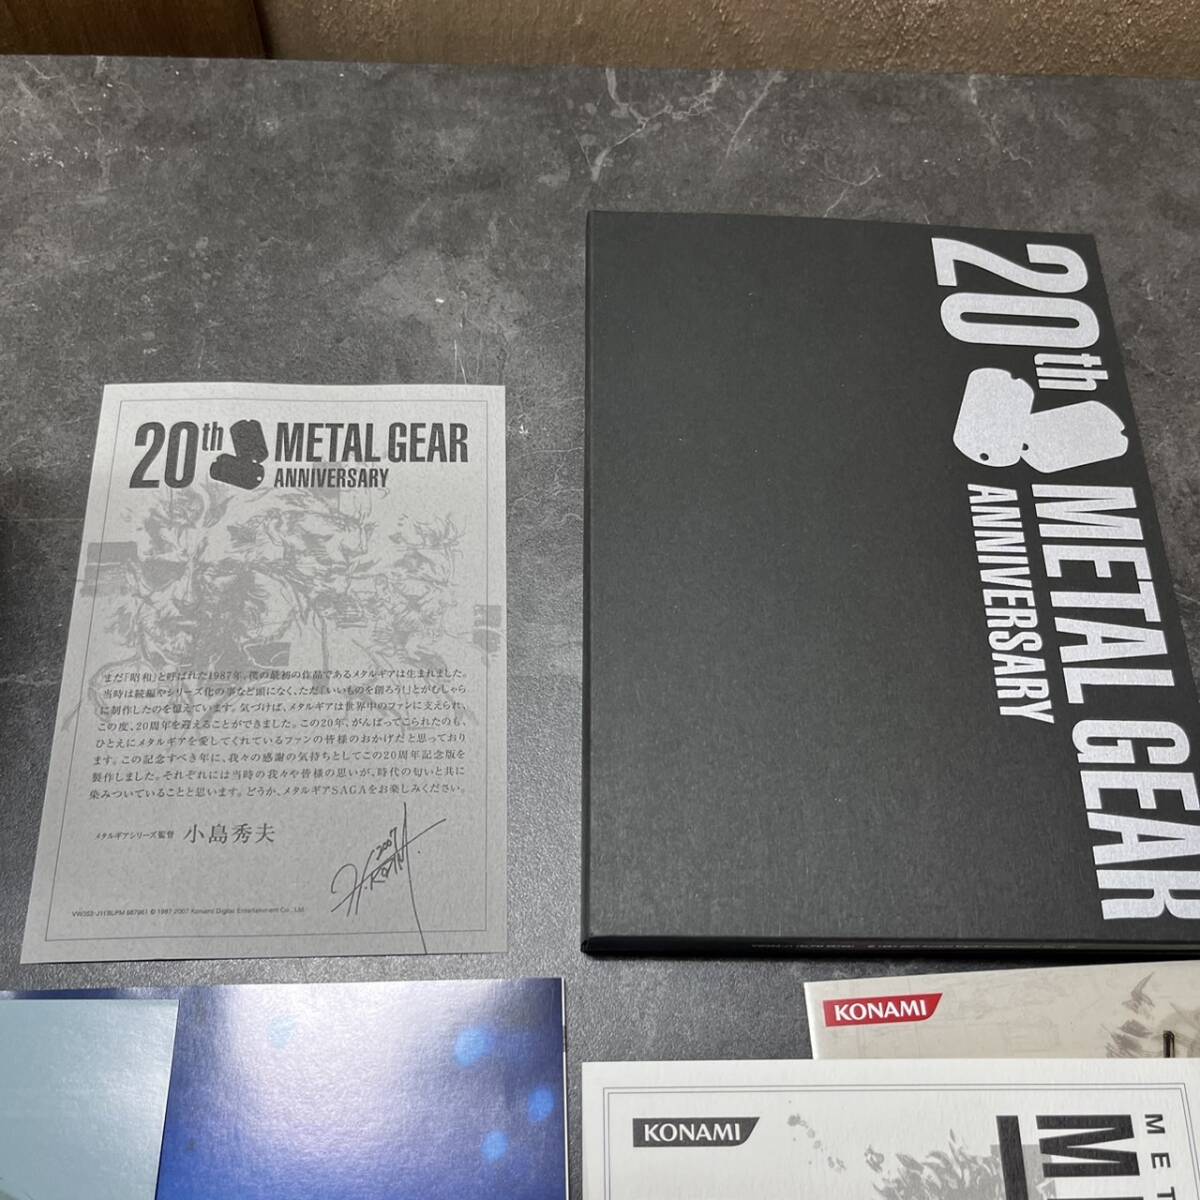 ☆METAL GEAR SOLID COLLECTION 1987-2007 20th ANNIVERSARY メタルギアソリッド ゲーム ソフト 箱/取説付(中古品/現状品/保管品)☆_画像3